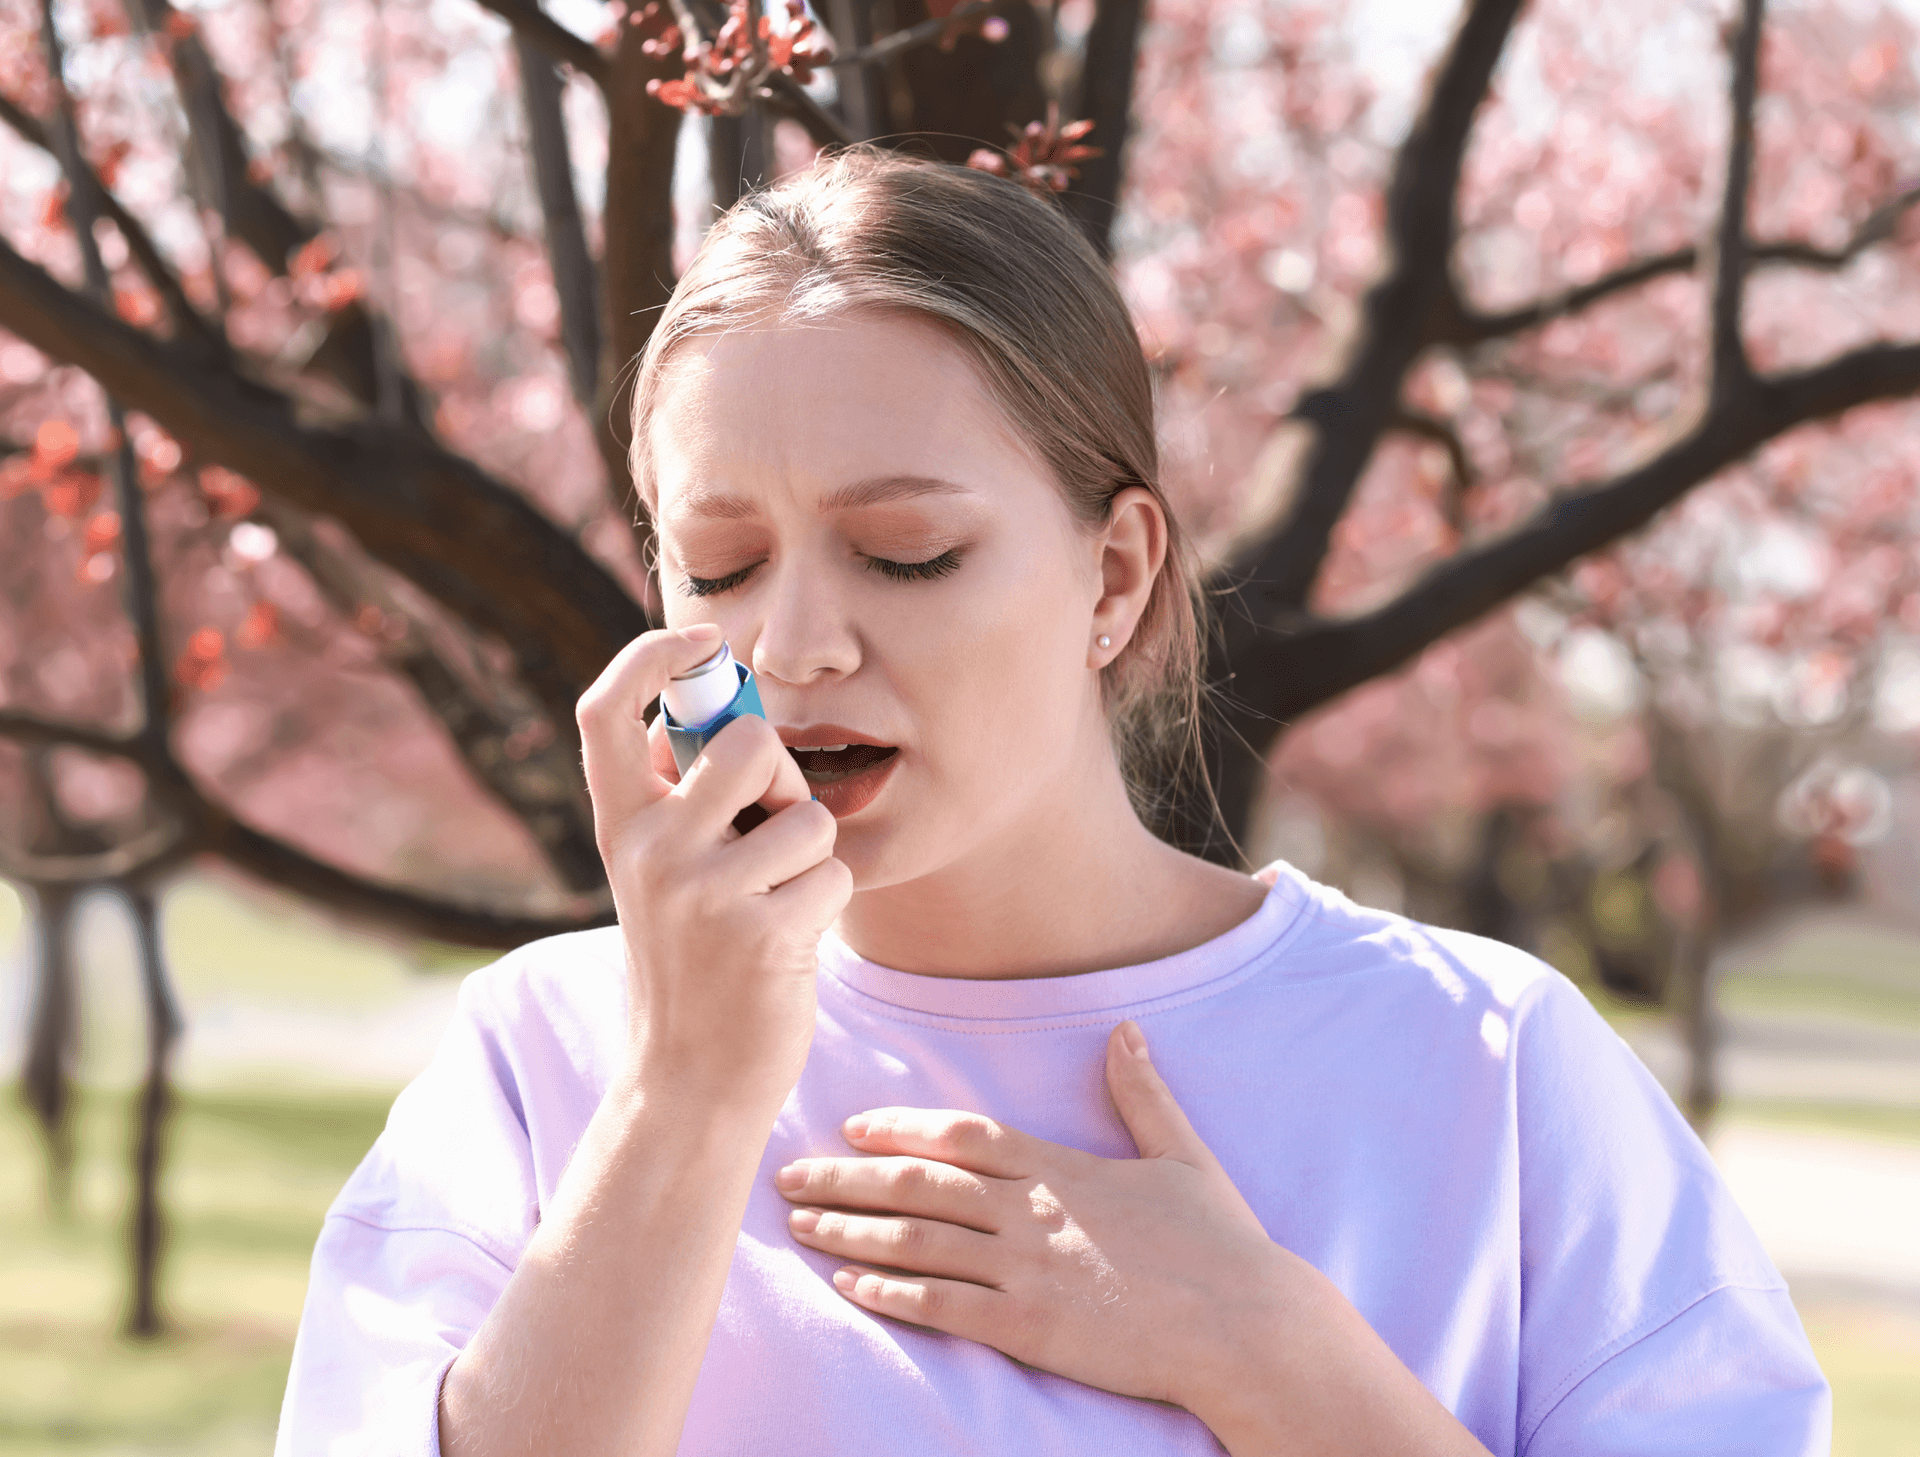 How to look after your lungs in spring